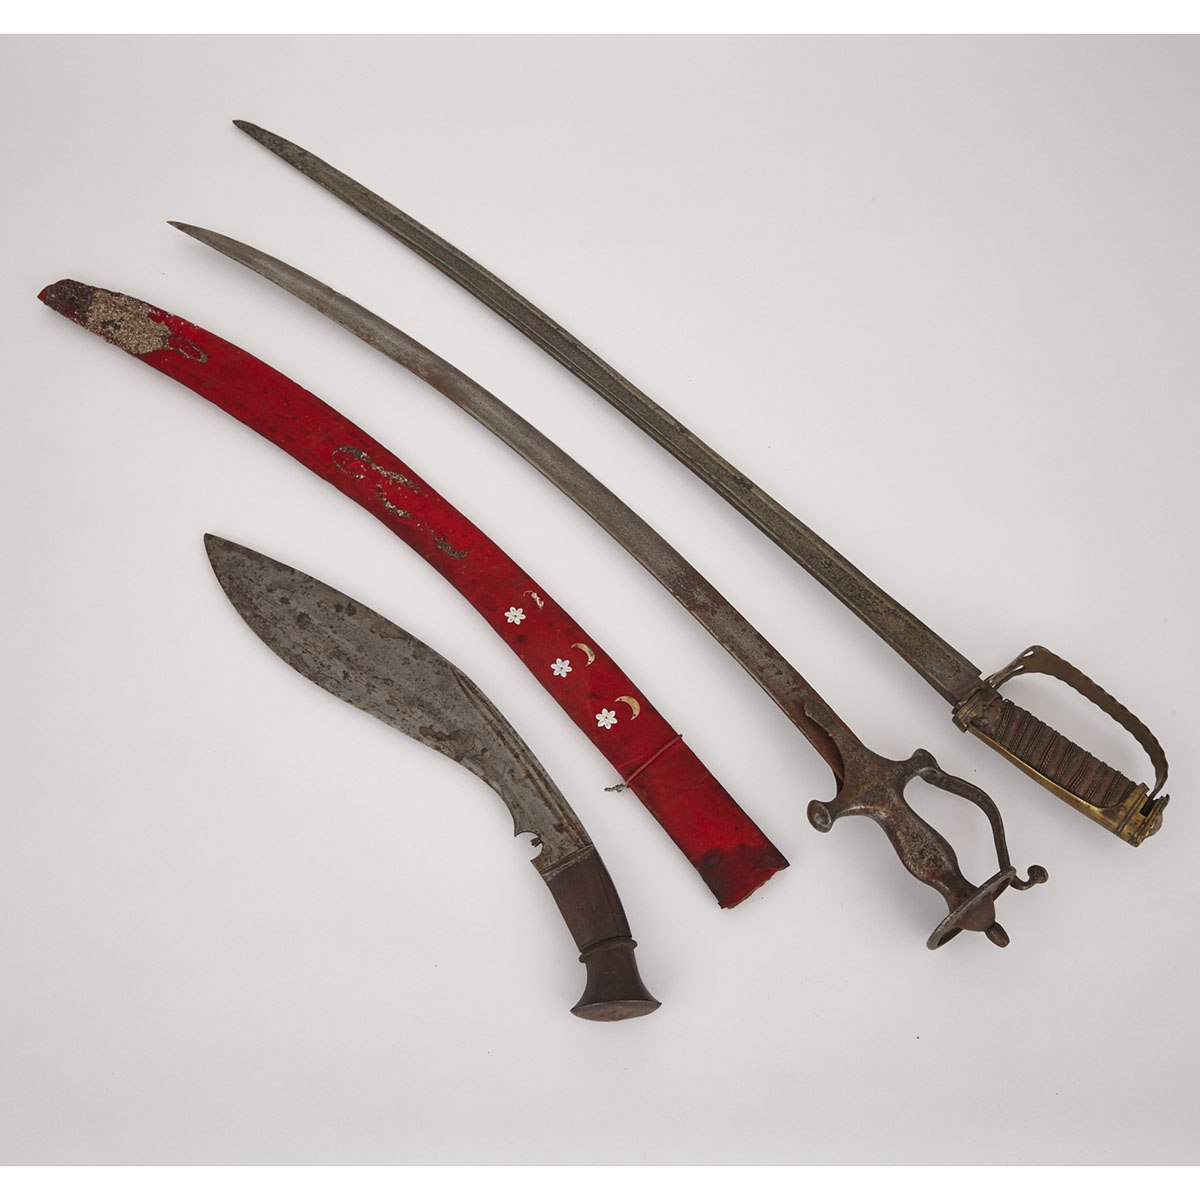 Three South Asian Edged Weapons, 19th century